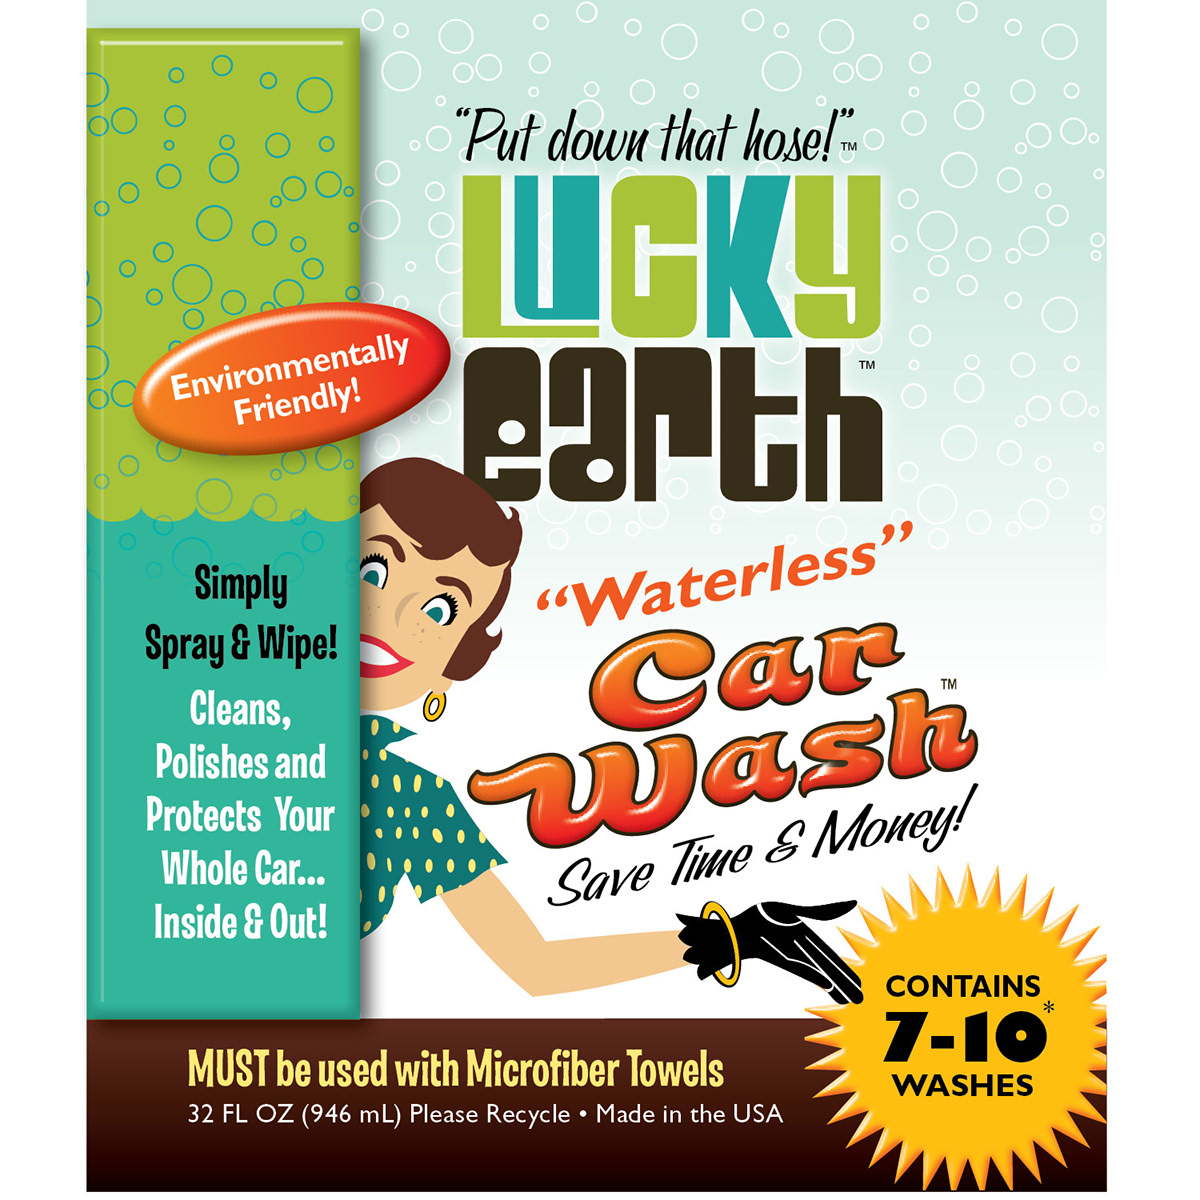 lucky earth waterless car wash environment environmentally friendly eco system clean product Auto automobile water save Conserve Nature natural herbal all Driving Washing cleaning green building brand graphic Retro 50s 60s 70s leave it to beaver tv show vintage space age mid century modern kitch kitchy camp campy kitchen dish woman Character cartoon Original funny kids family happy smiling smile polka dot Lady